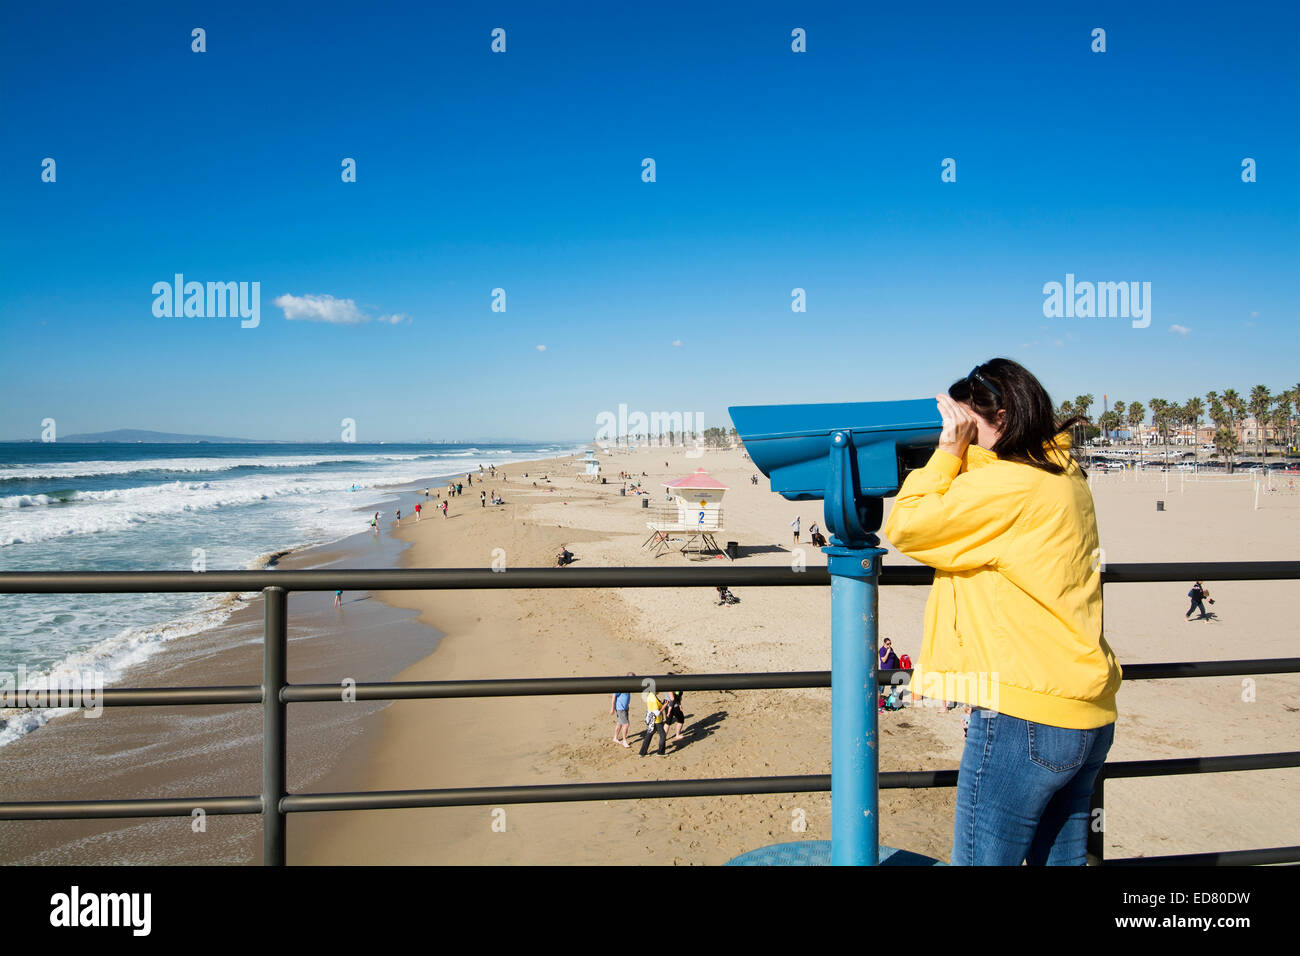 A tourist on the Huntington Beach pier watches surfers through coin operated binoculars during a bright, sunny day. T Stock Photo